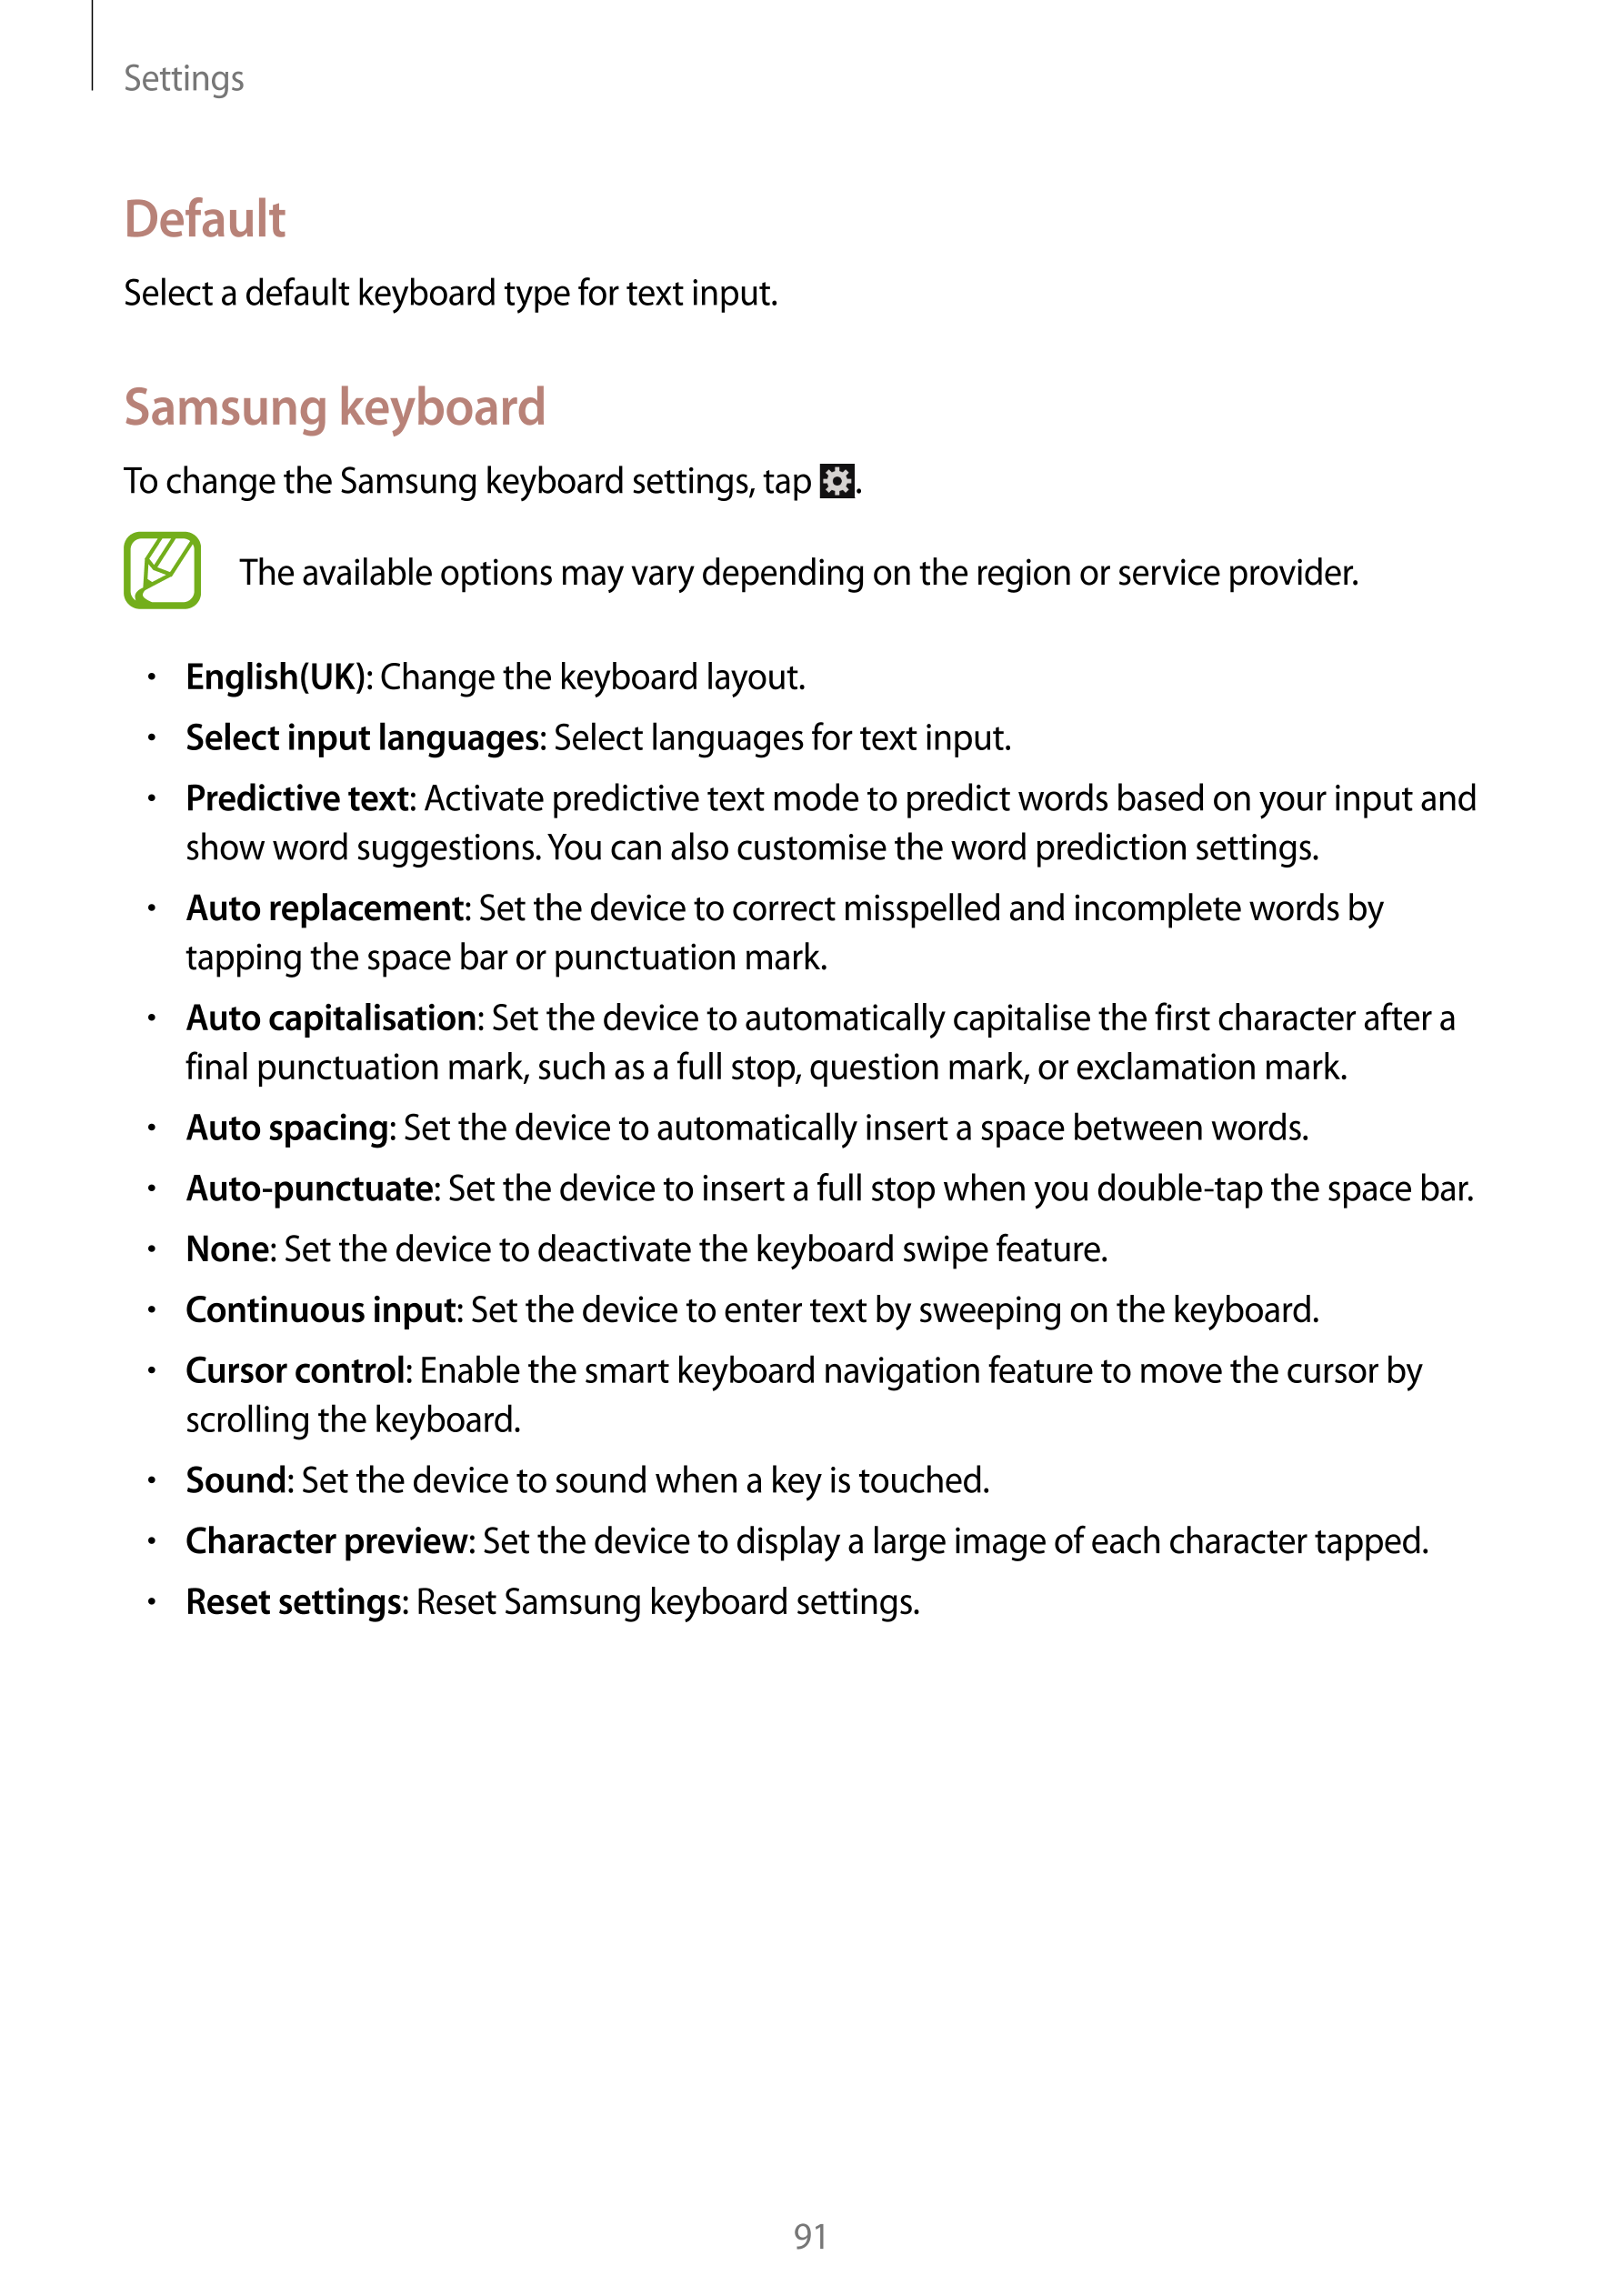 Settings
Default
Select a default keyboard type for text input.
Samsung keyboard
To change the Samsung keyboard settings, tap  .